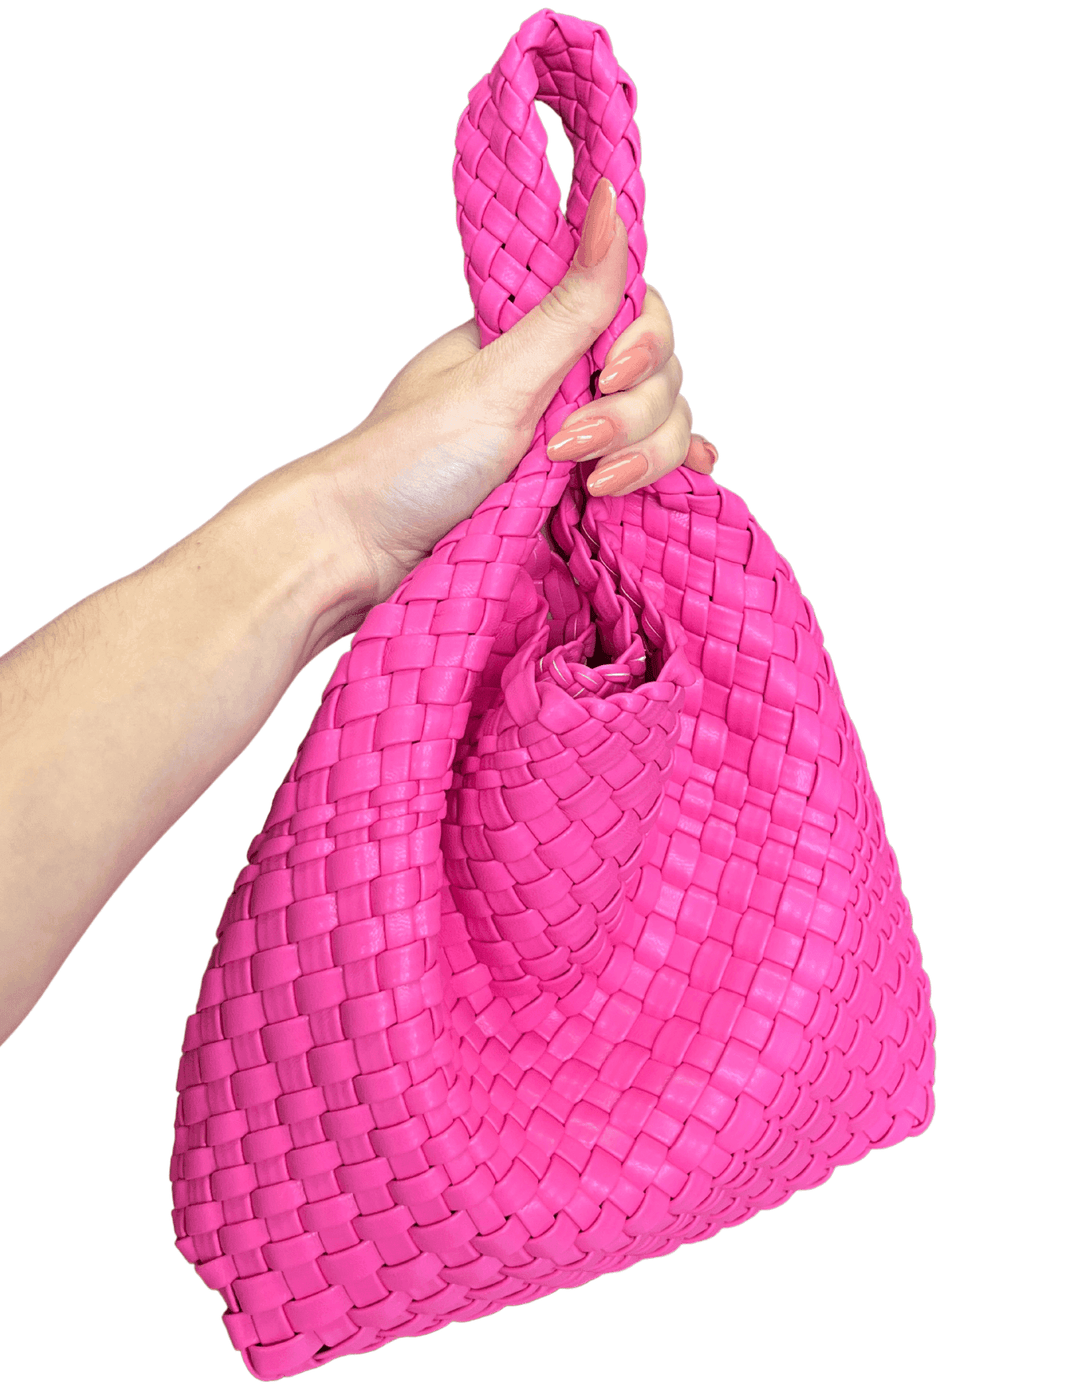 spring summer hot pink woven tote bag one strap